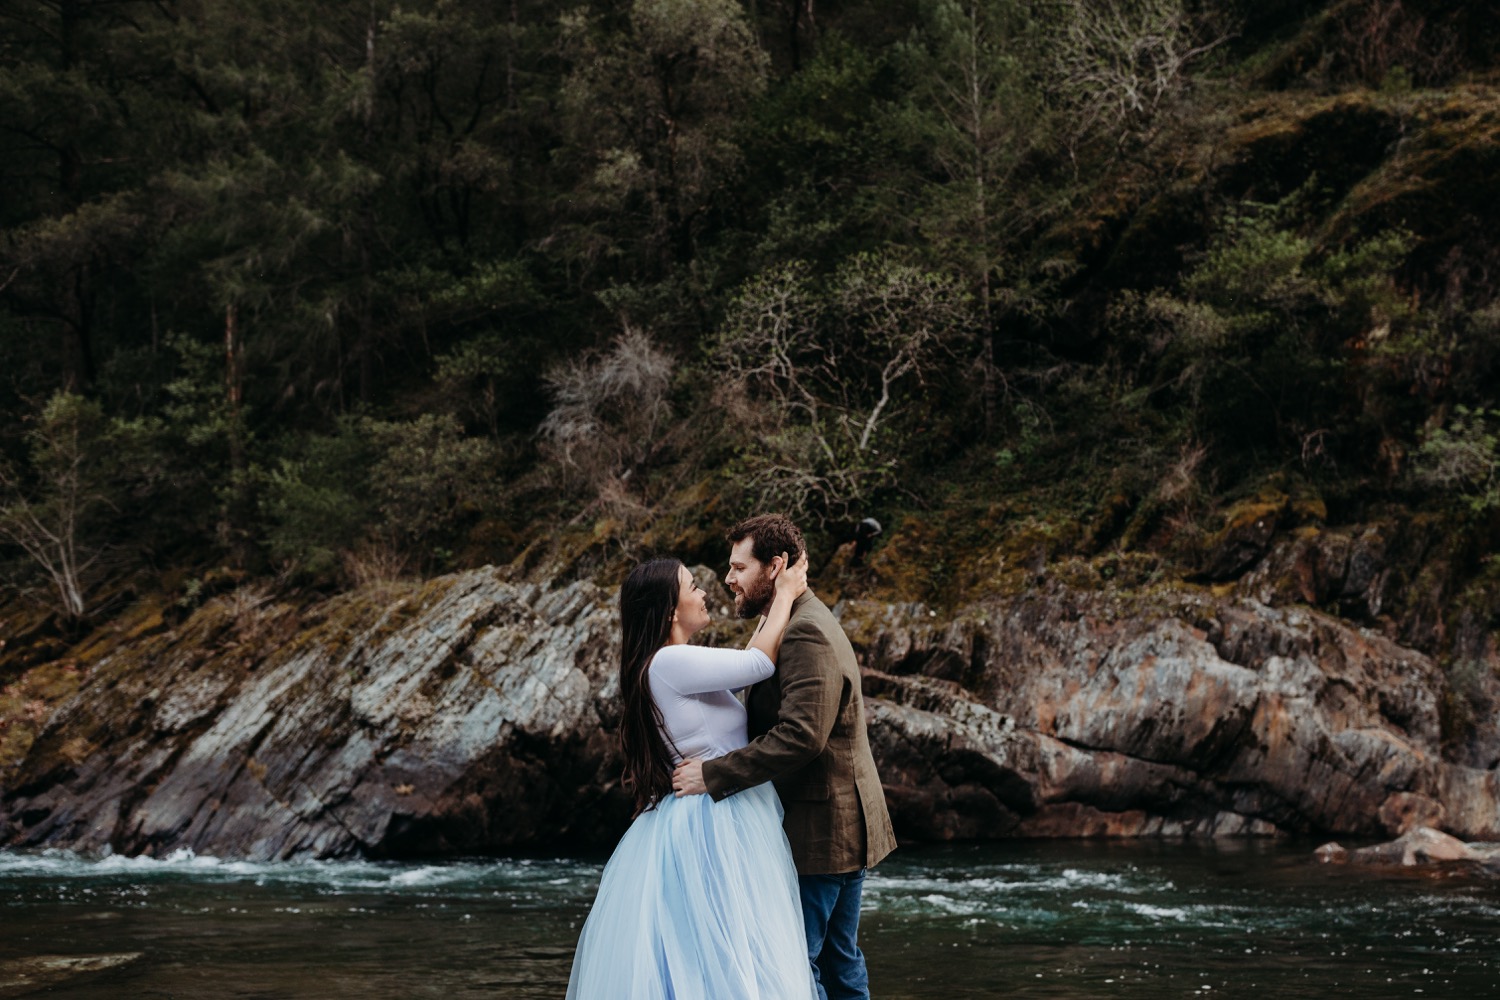 Couple stands in an embrace with the rushing American River in the background during their engagement photoshoot.